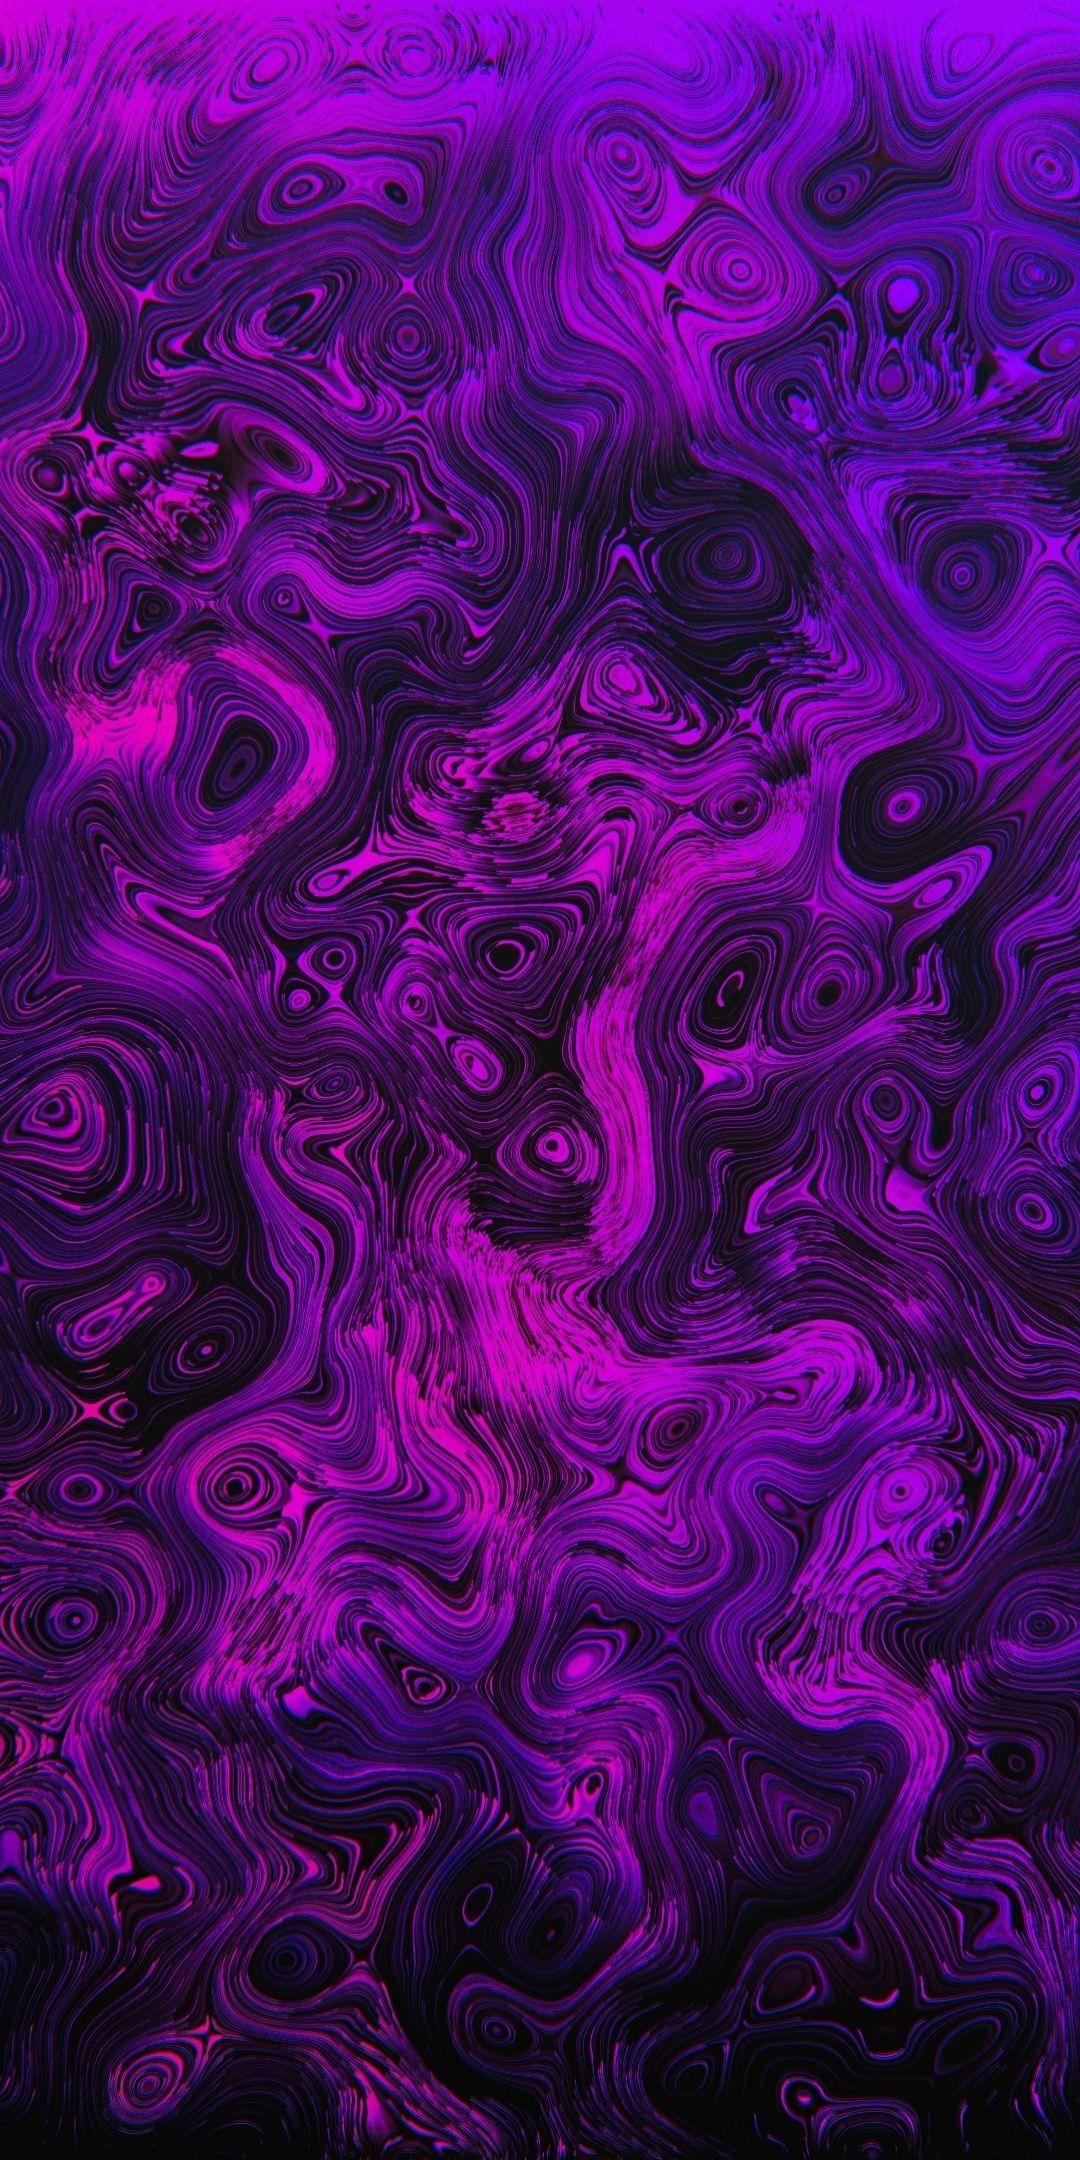 Purple Psychedelic Wallpapers Top Free Purple Psychedelic Backgrounds Wallpaperaccess Hippie wallpaper trippy wallpaper purple wallpaper aesthetic pastel wallpaper retro wallpaper cute wallpaper backgrounds wallpaper iphone cute pretty wallpapers galaxy wallpaper. purple psychedelic wallpapers top